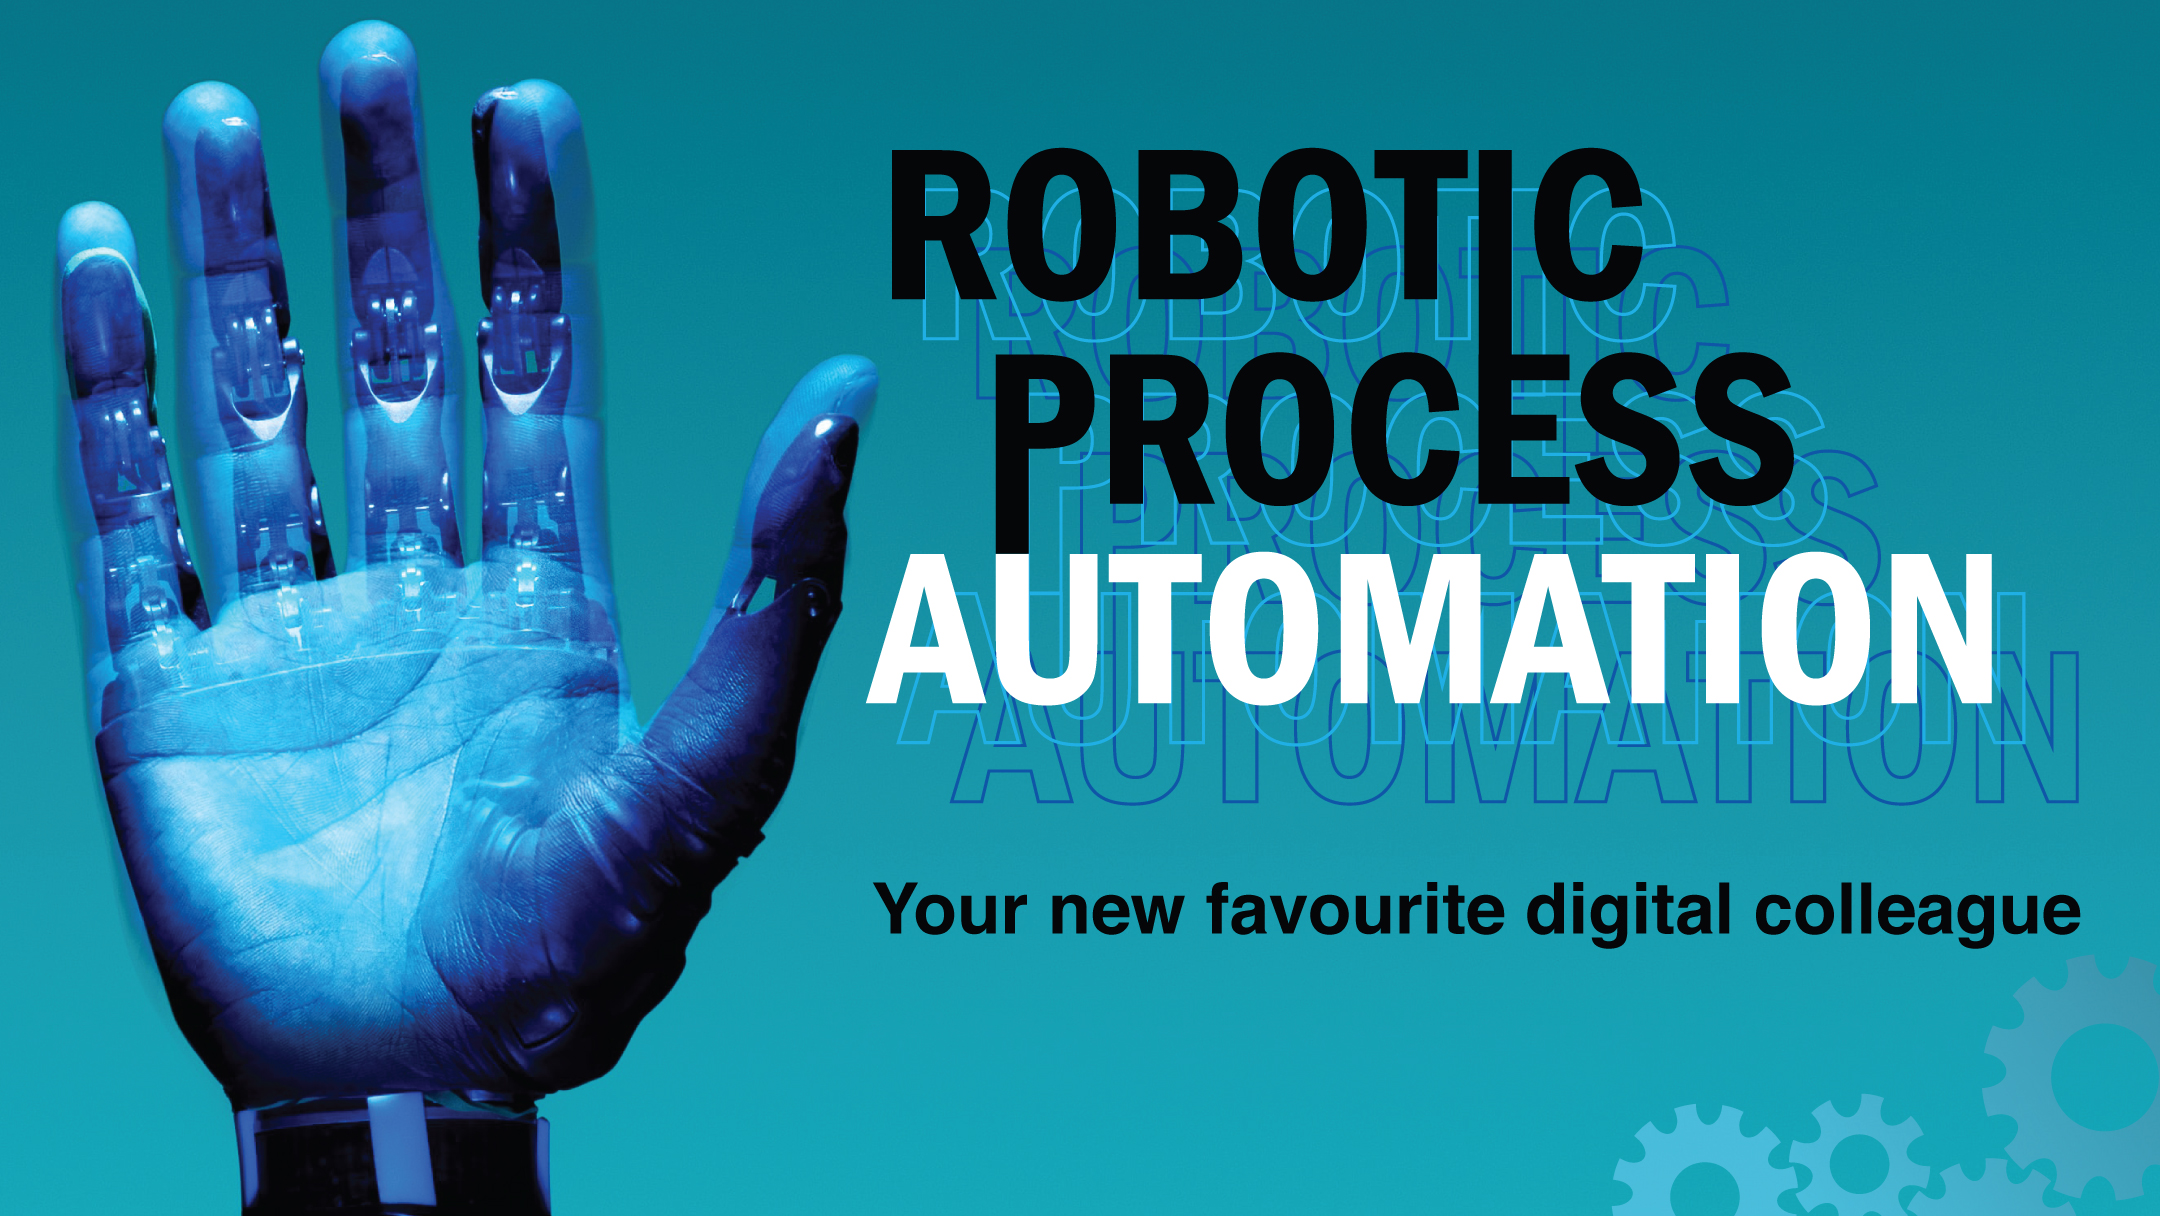 Robotic process automation (RPA): Your new favourite digital colleague